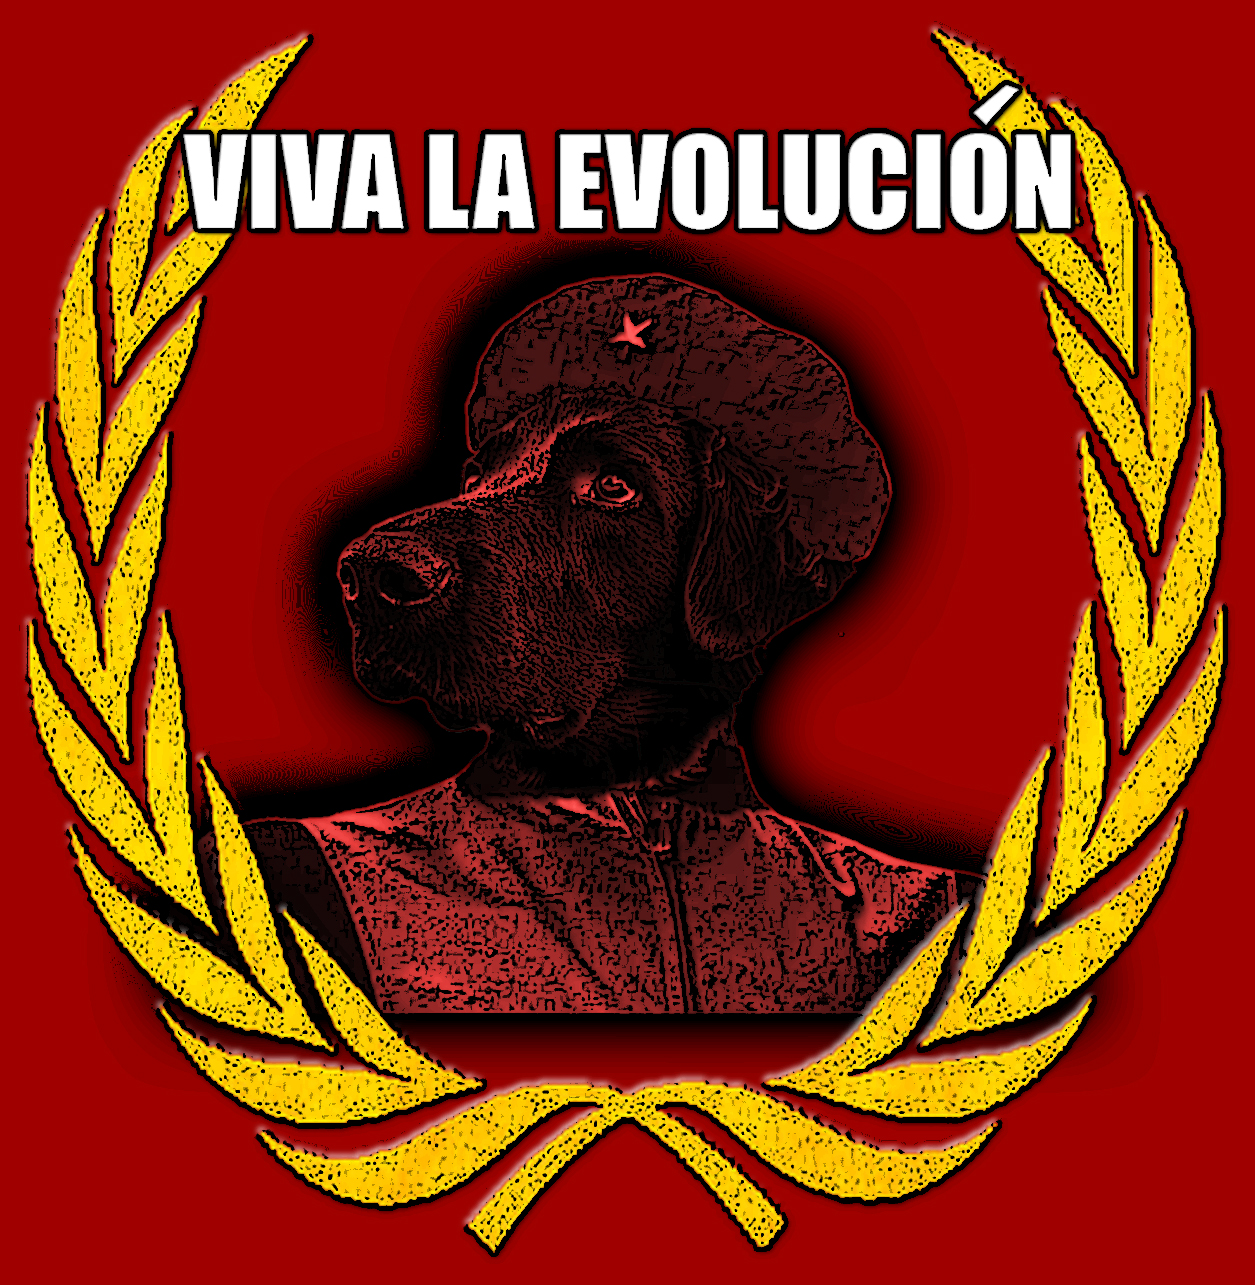 My dog is more evolved than most Cubans.